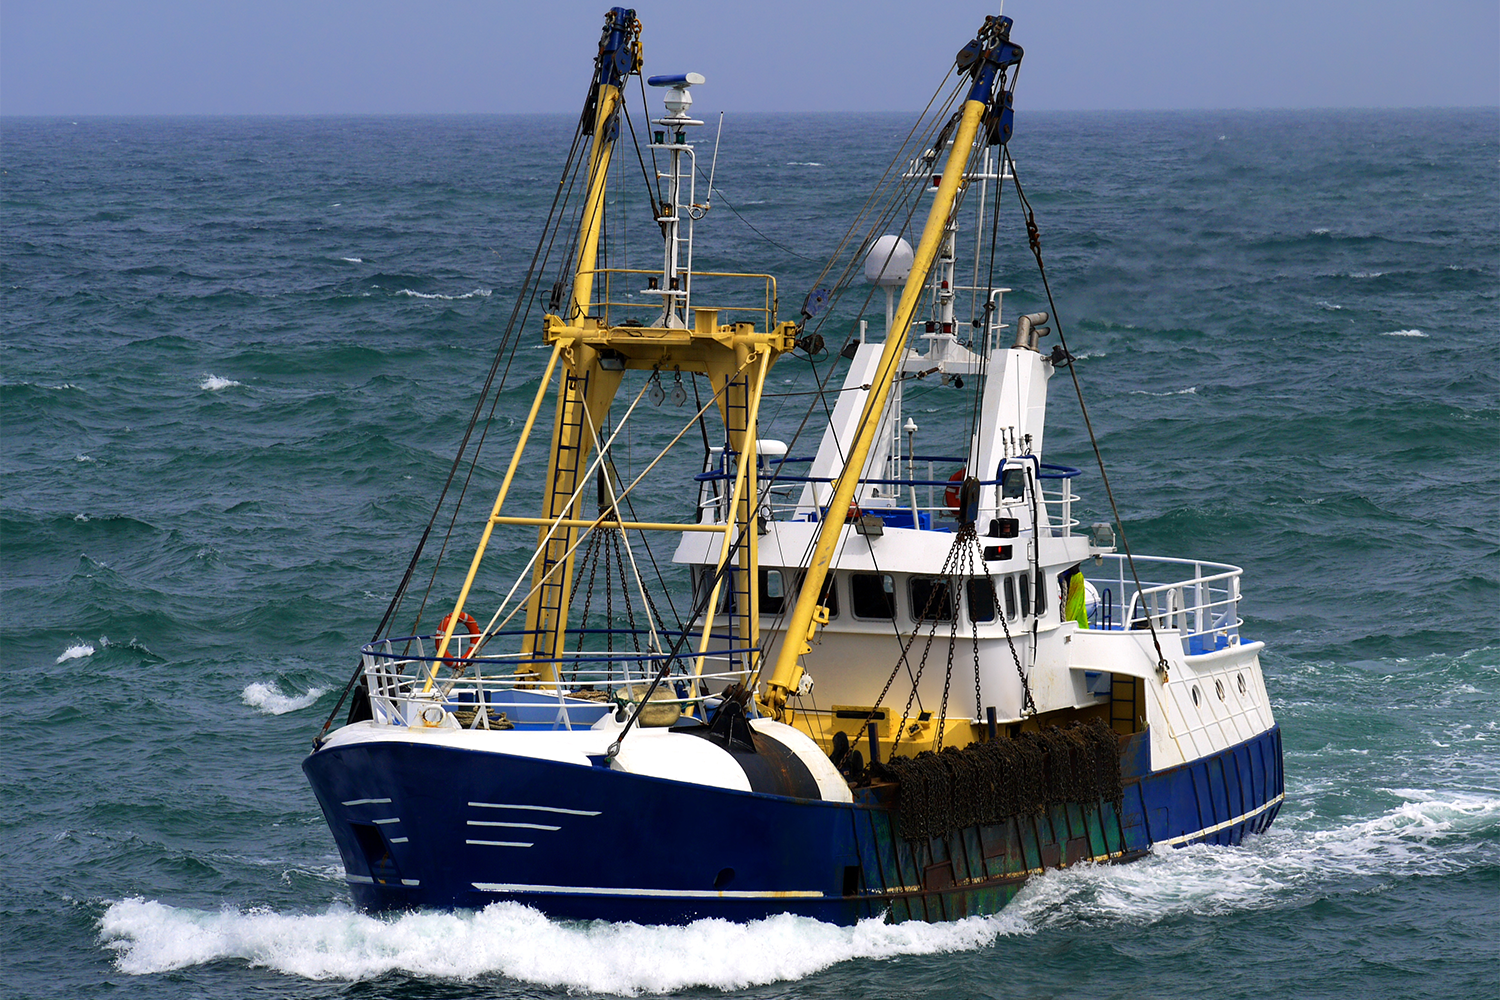 Industrial trawl fishery for B. vaillantii. Trawl fisheries in the